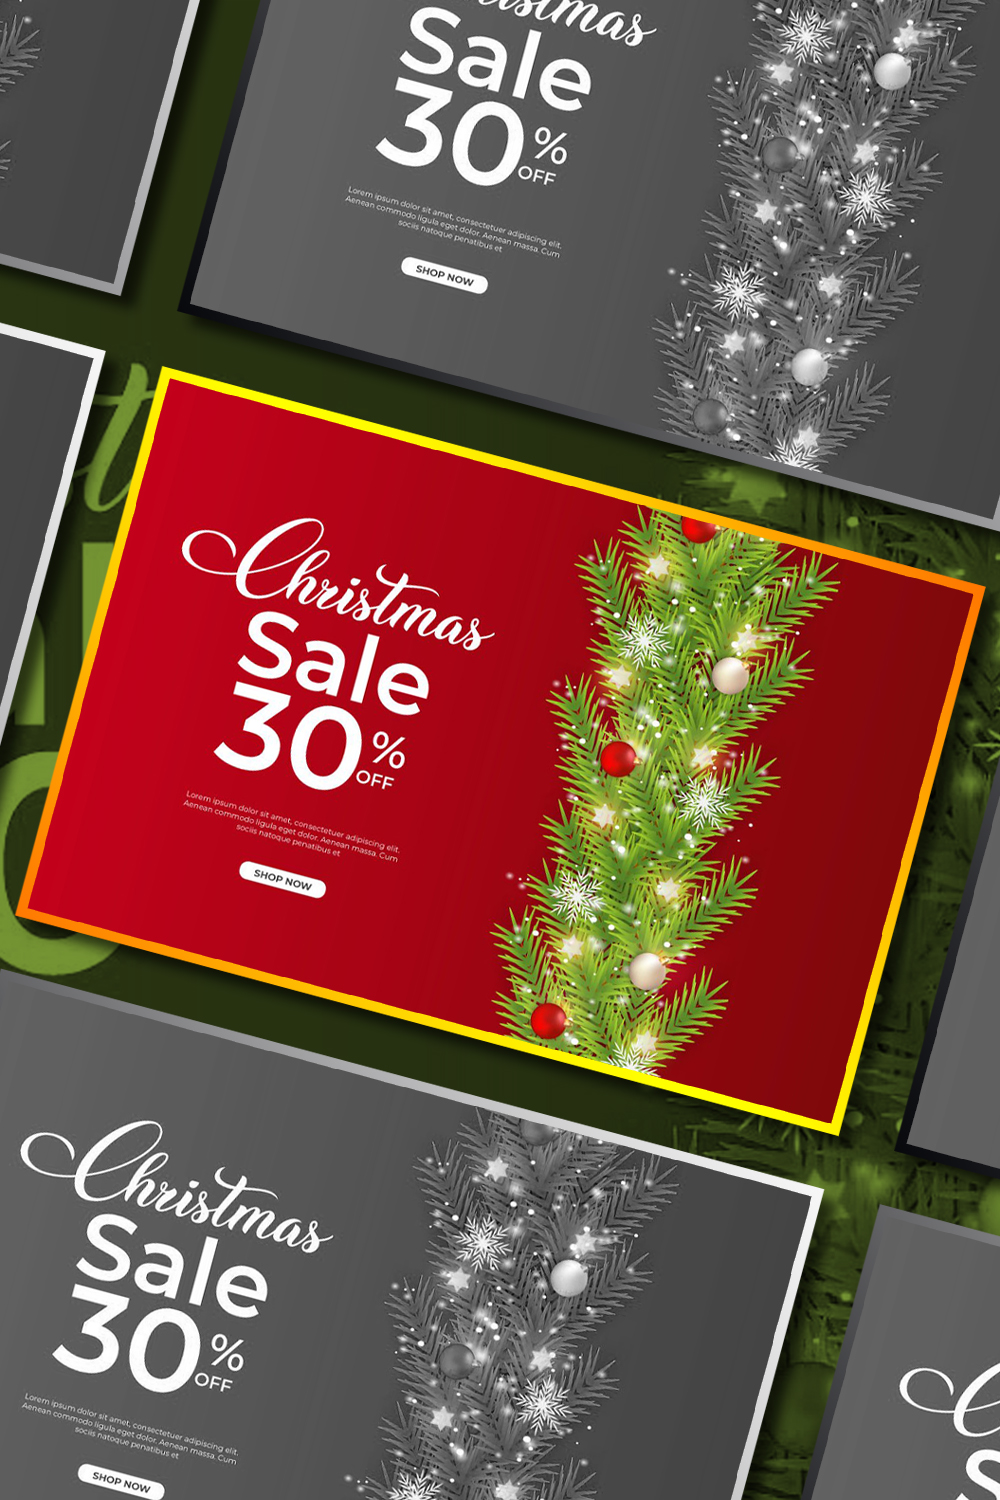 Pinterest images christmas sales banner with red ball.